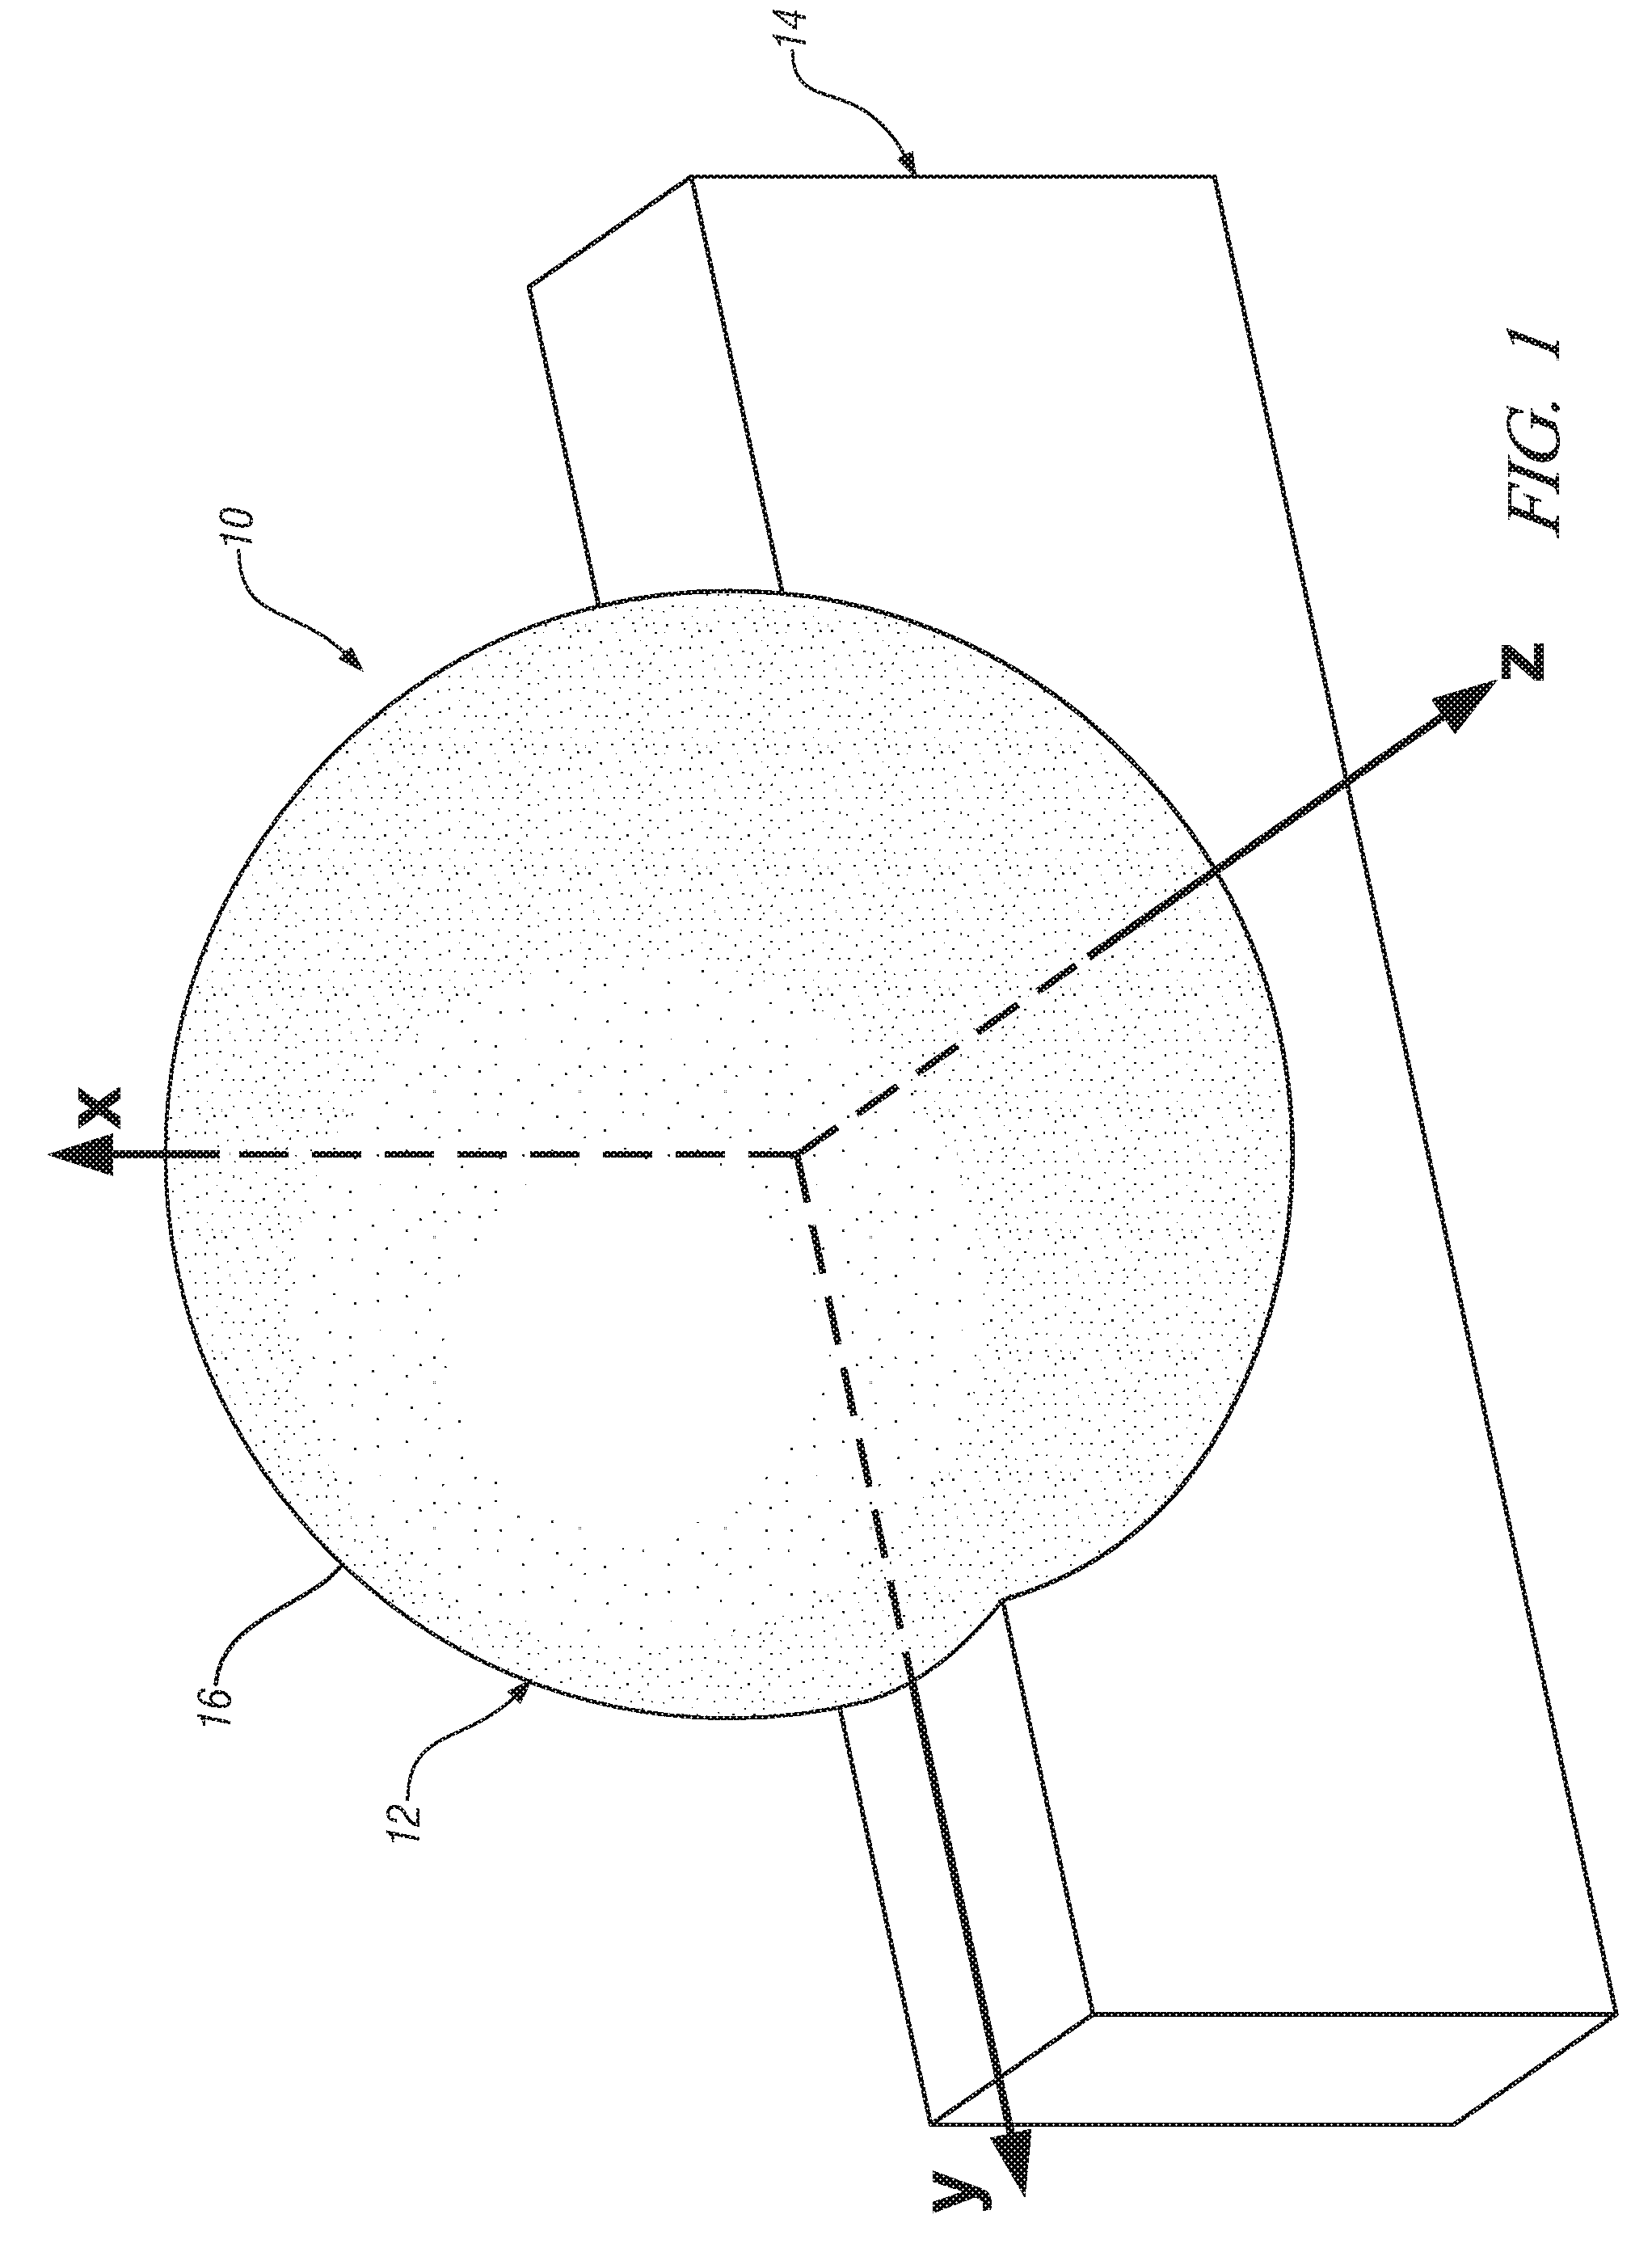 Multi-beam antenna with shared dielectric lens